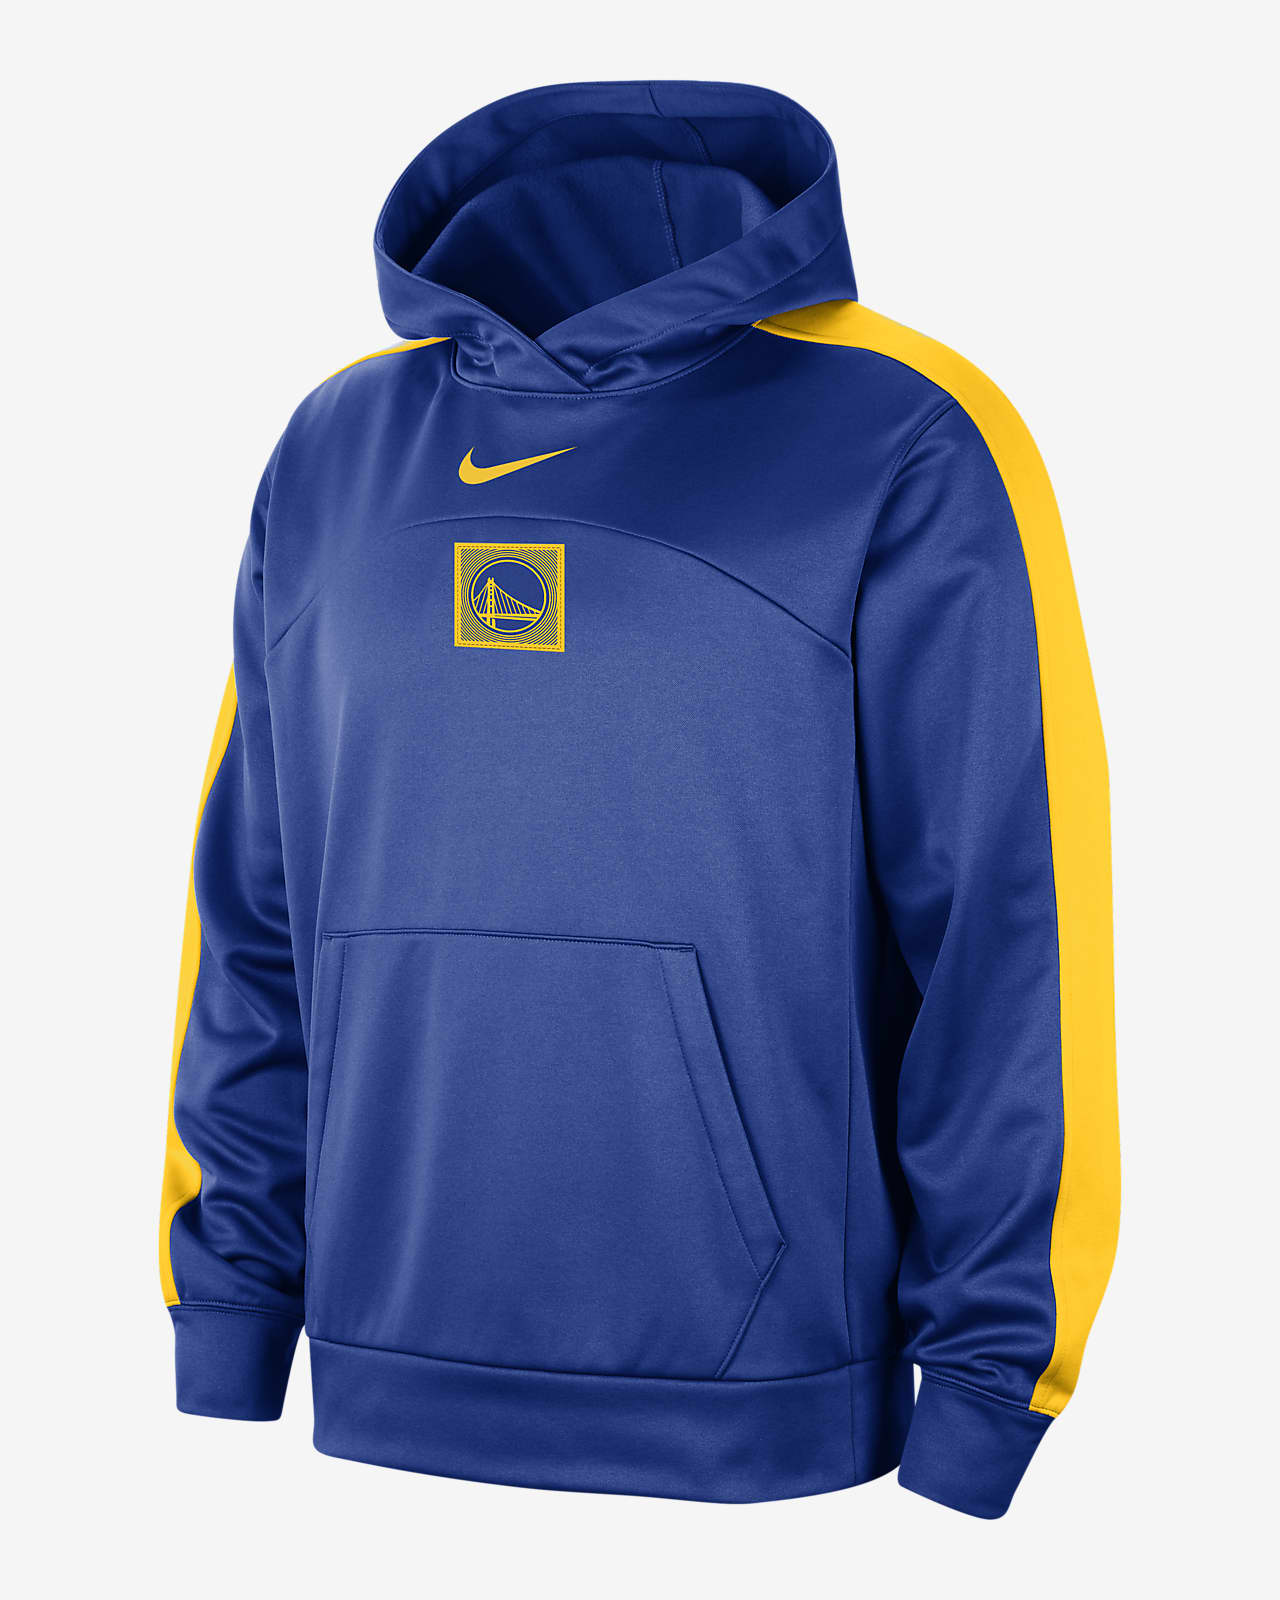 Golden State Warriors Starting 5 Men's Nike Therma-FIT NBA Pullover Hoodie